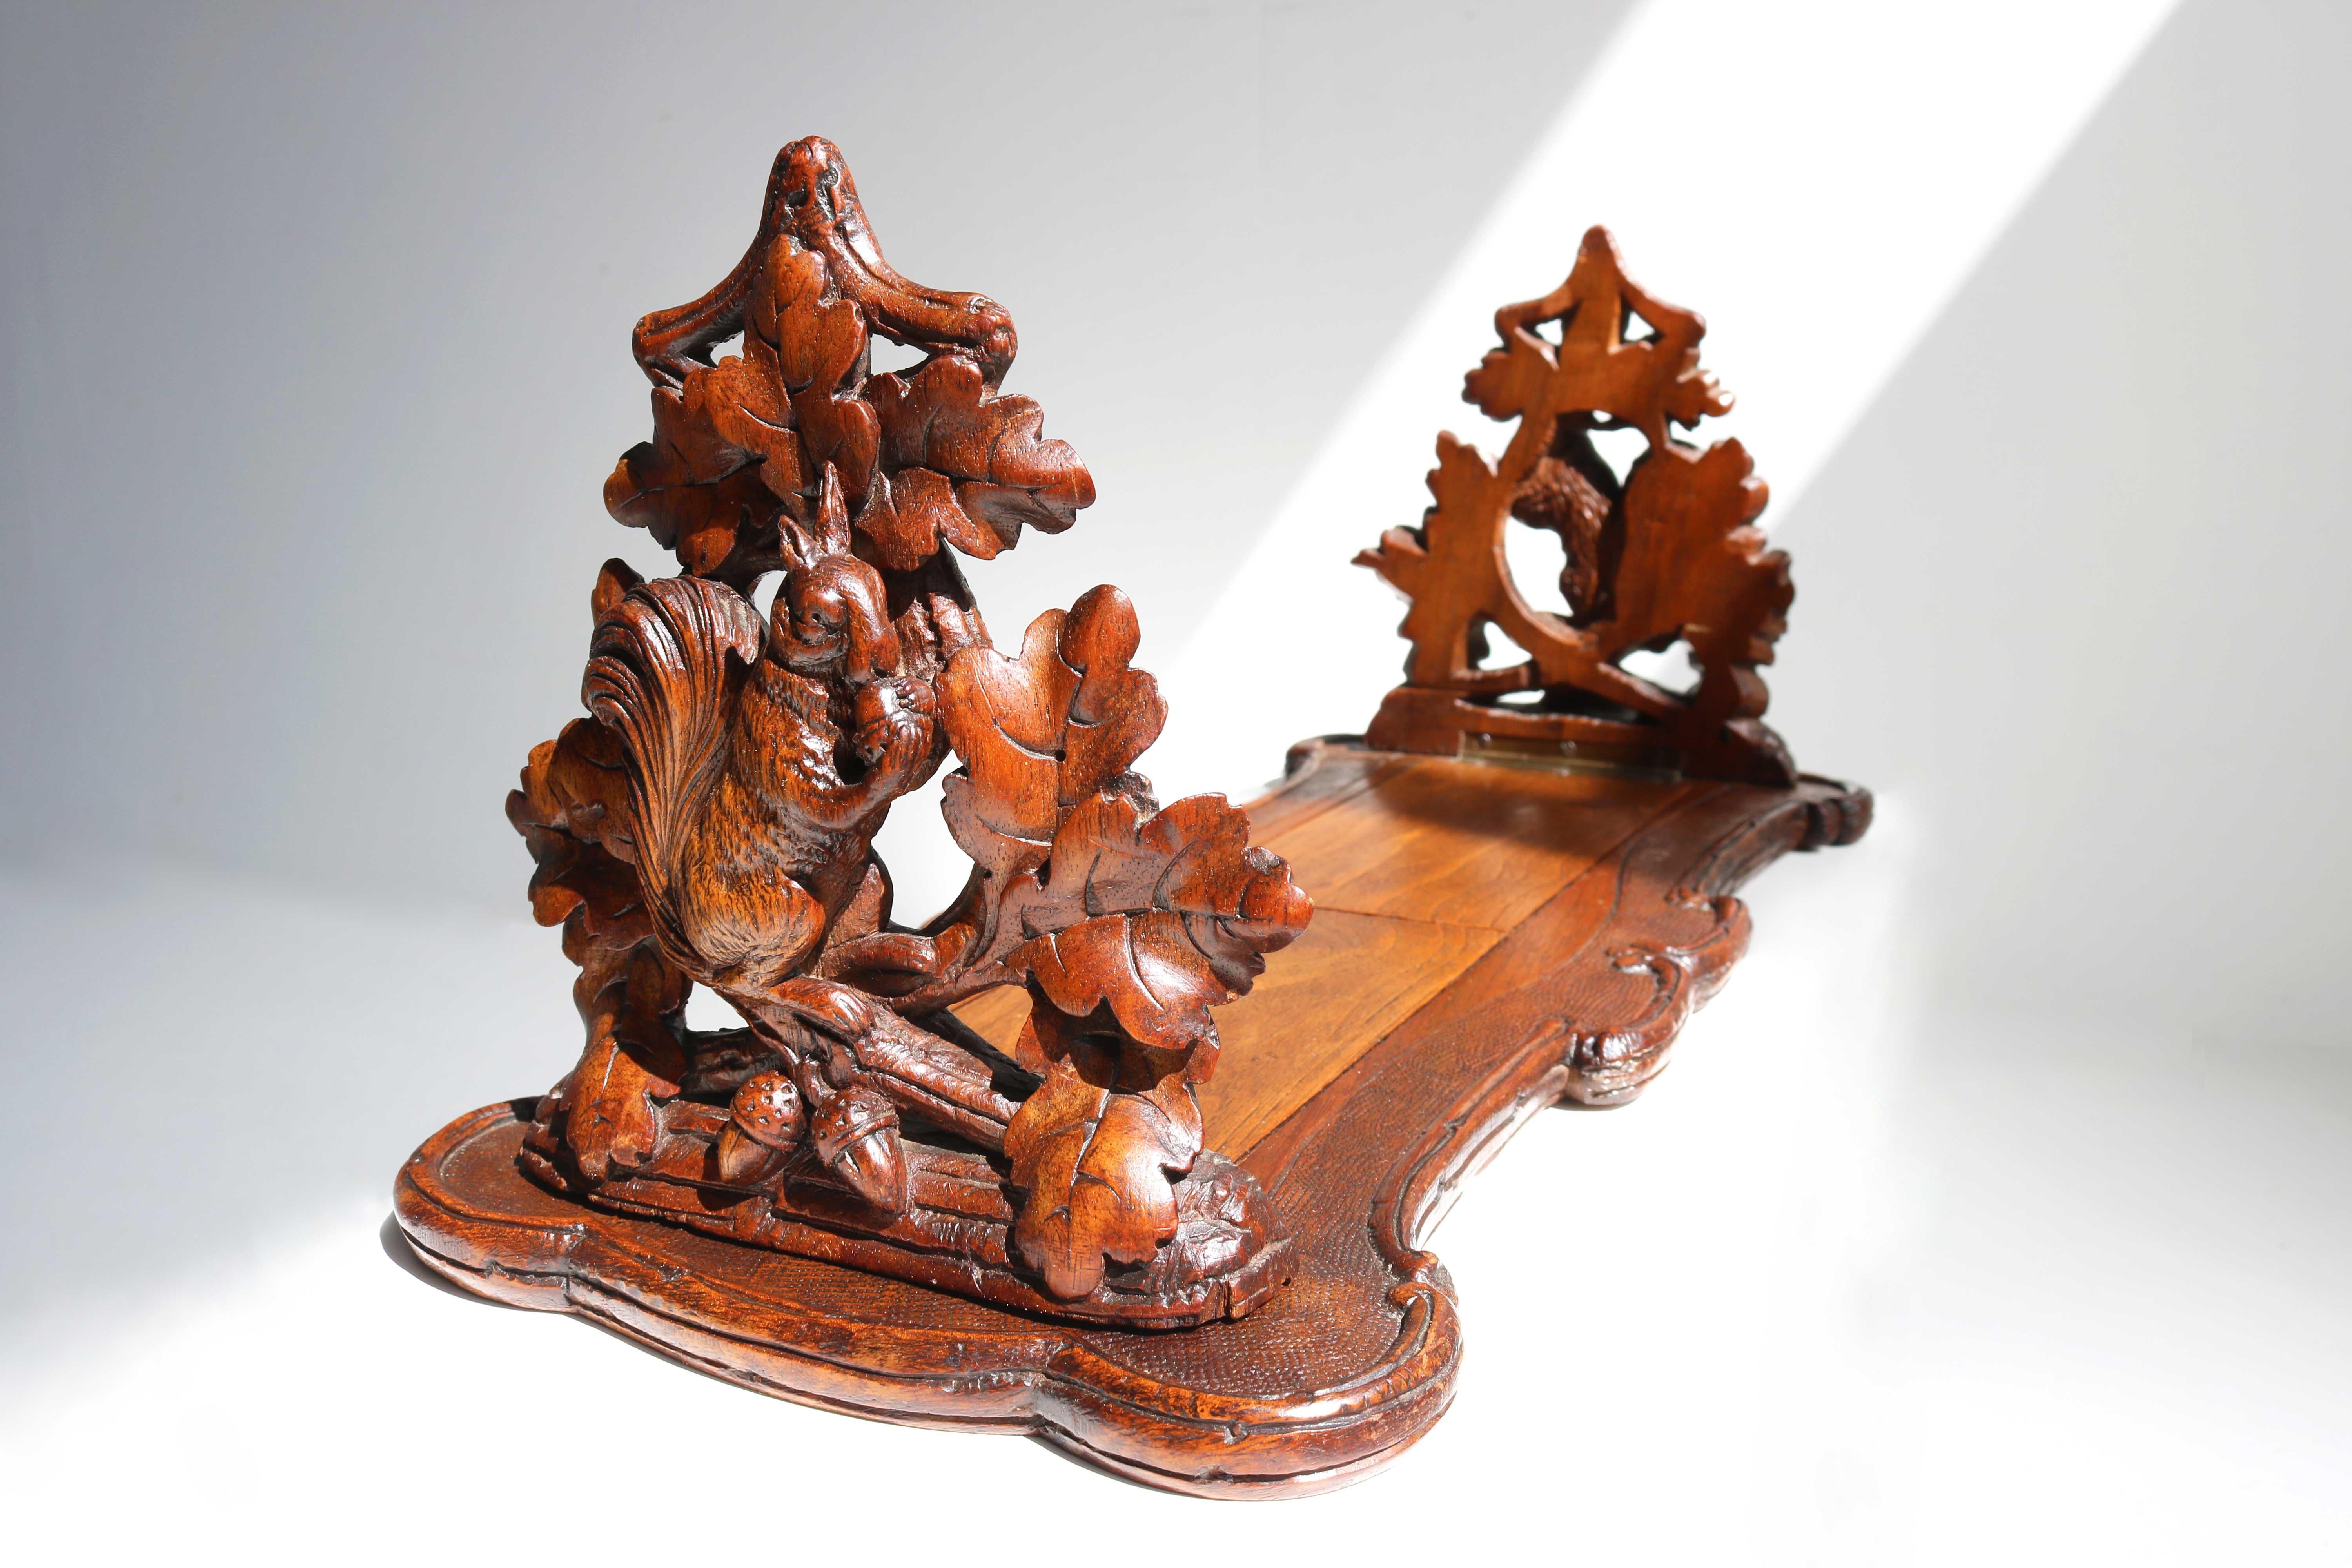 Antiquelate 19th century black forest books rack/ book shelf with folding squirrels and acorn leaf bookends hand carved Swiss

Gorgeous 19th century antique Black Forest bookstand with sliding and folding bookends, hand carved from Switzerland, is